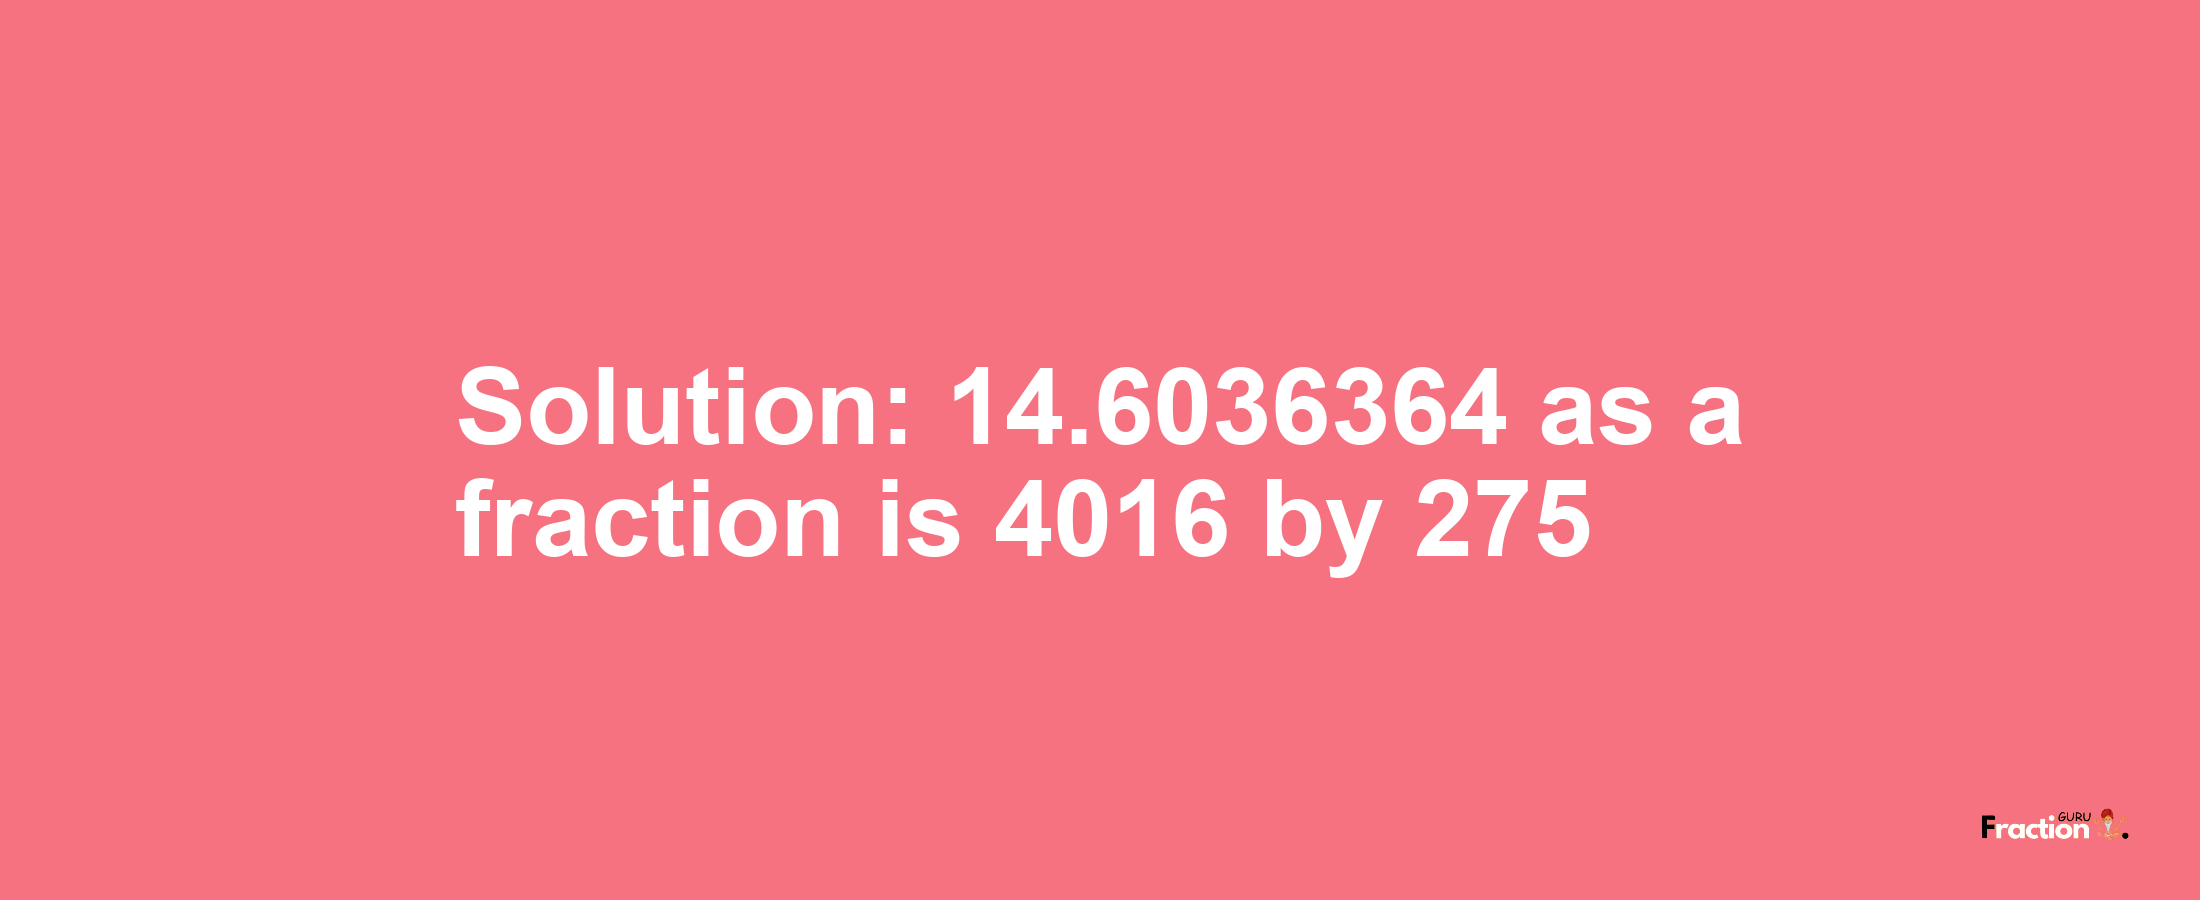 Solution:14.6036364 as a fraction is 4016/275